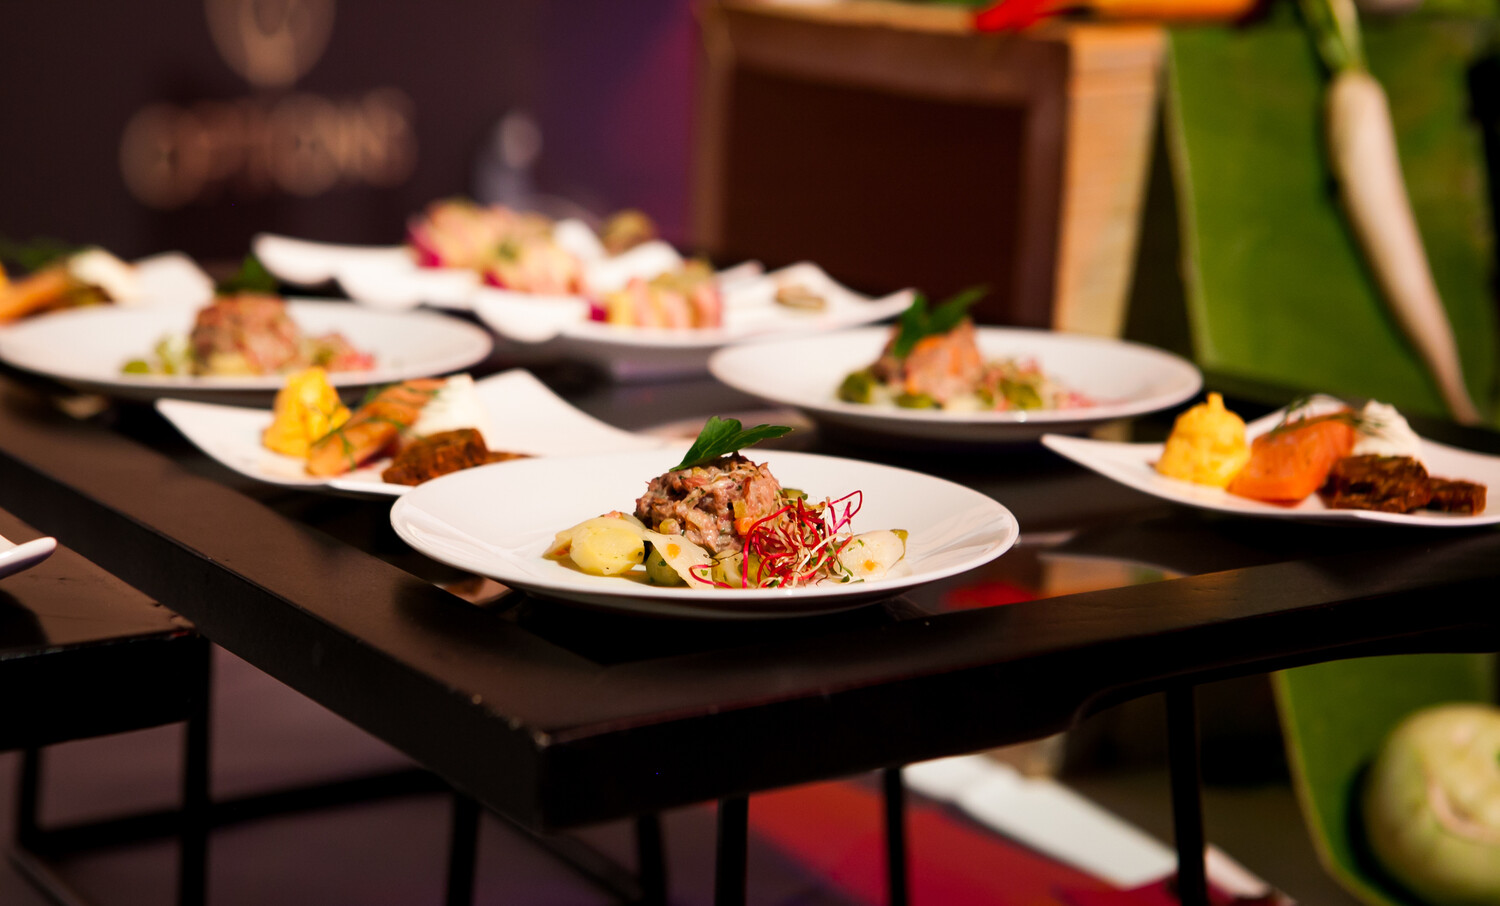 Our culinary team at Eventpark Kulinarik can bring our catering service to your event.